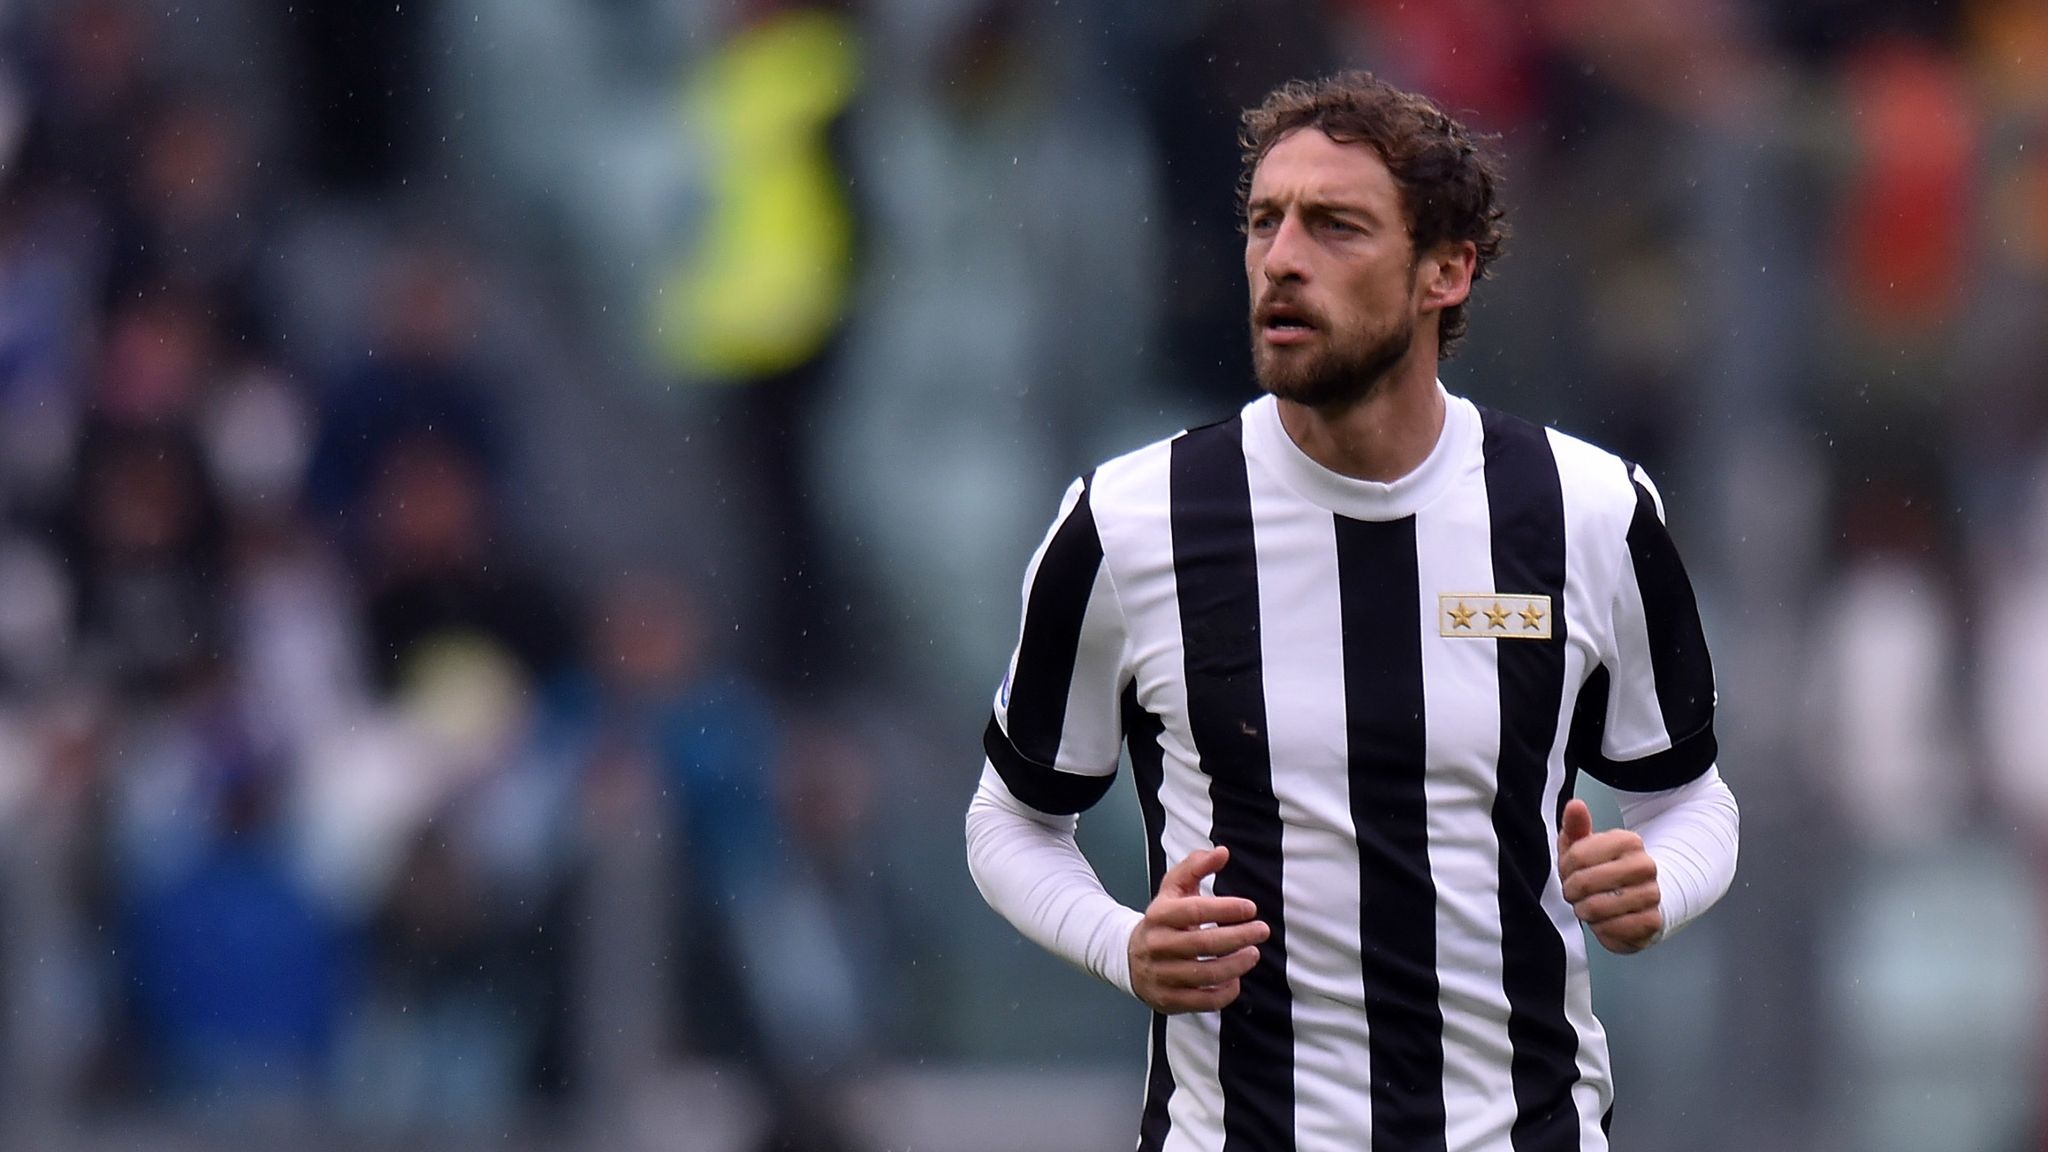 claudio marchisio retires from football at age of 33 football news sky sports claudio marchisio retires from football